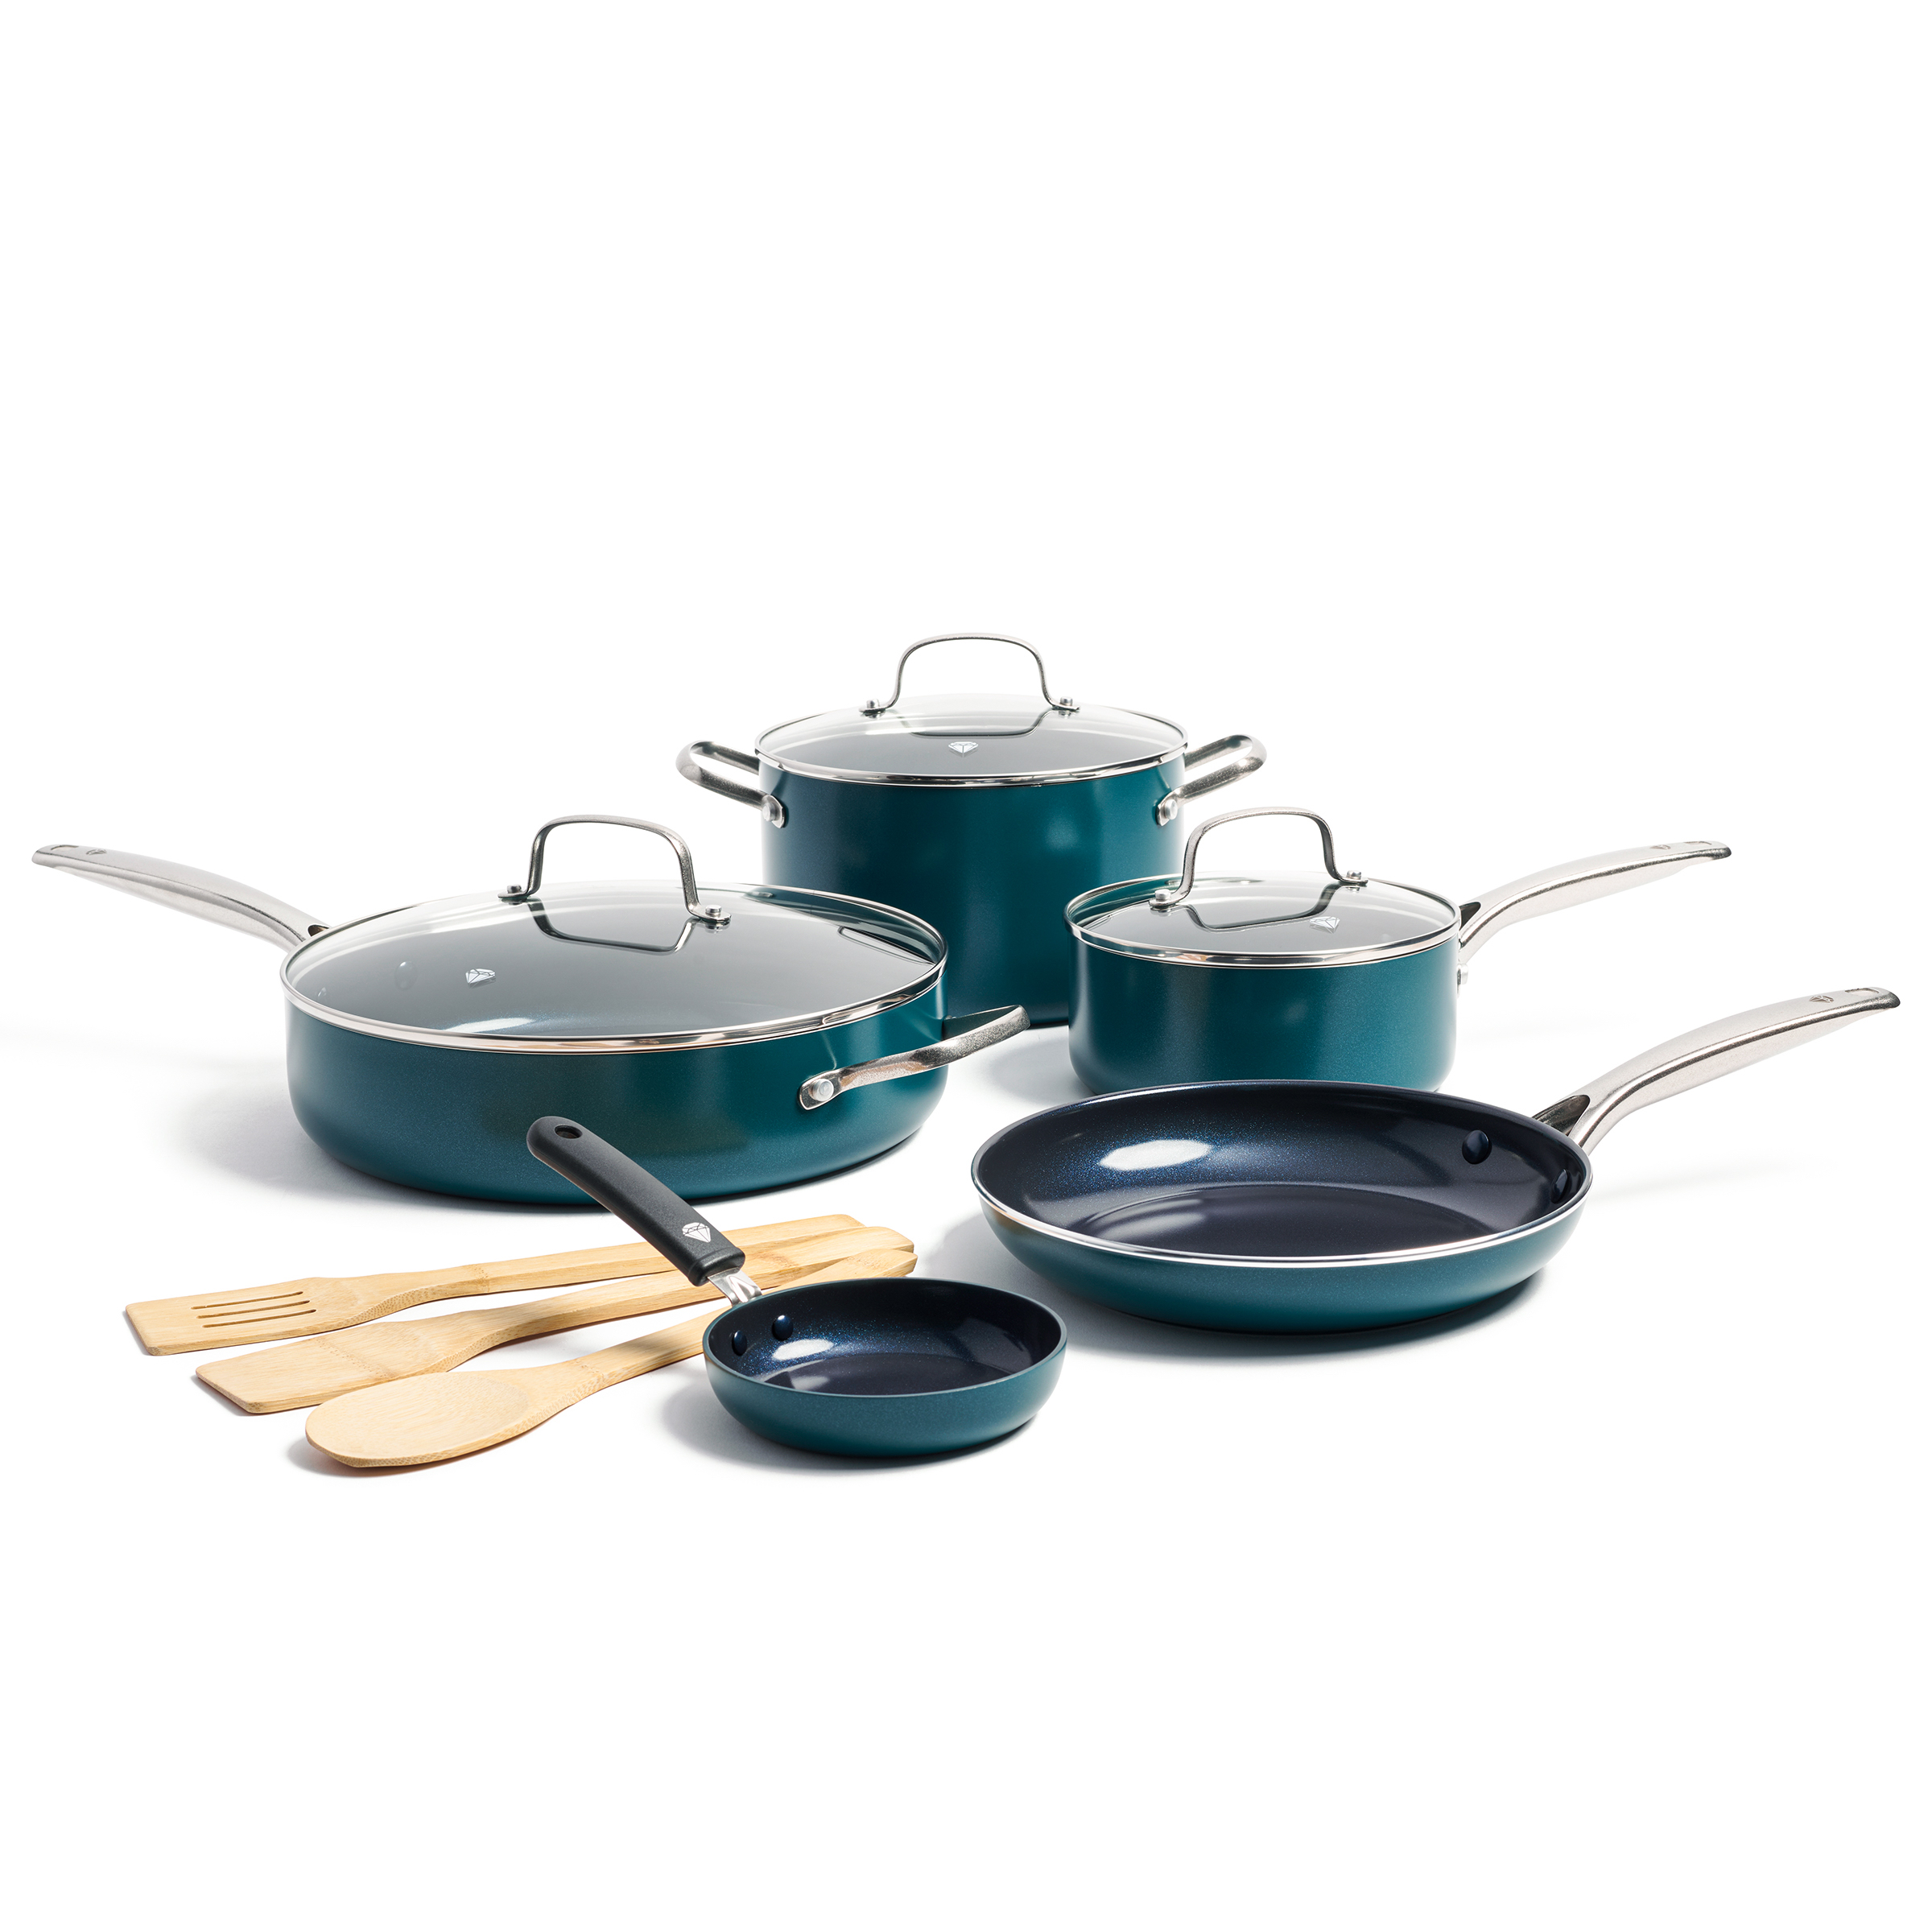 Blue Diamond Green Limited Edition Nonstick Ceramic 11-Piece Cookware Set - image 1 of 8